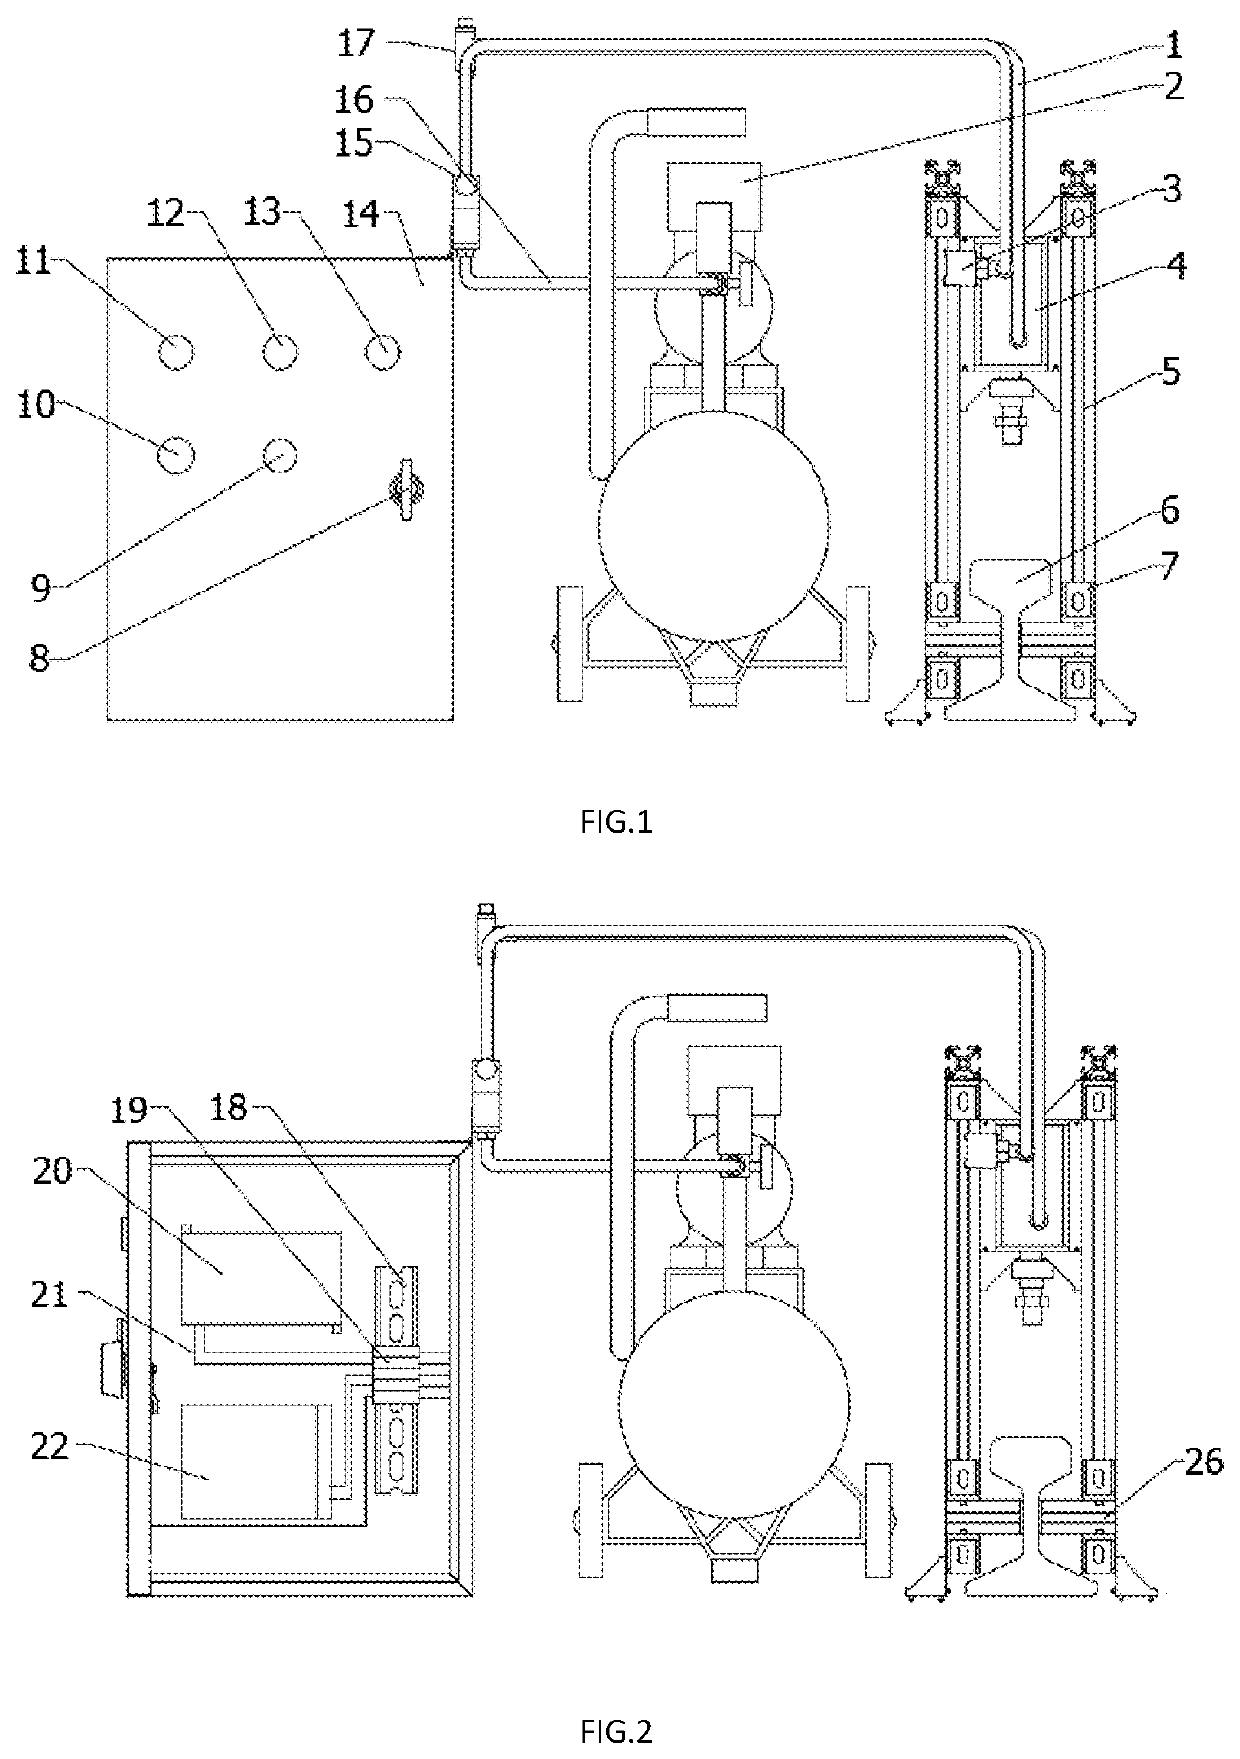 Portable pneumatic loading system for simulating operation of subway train